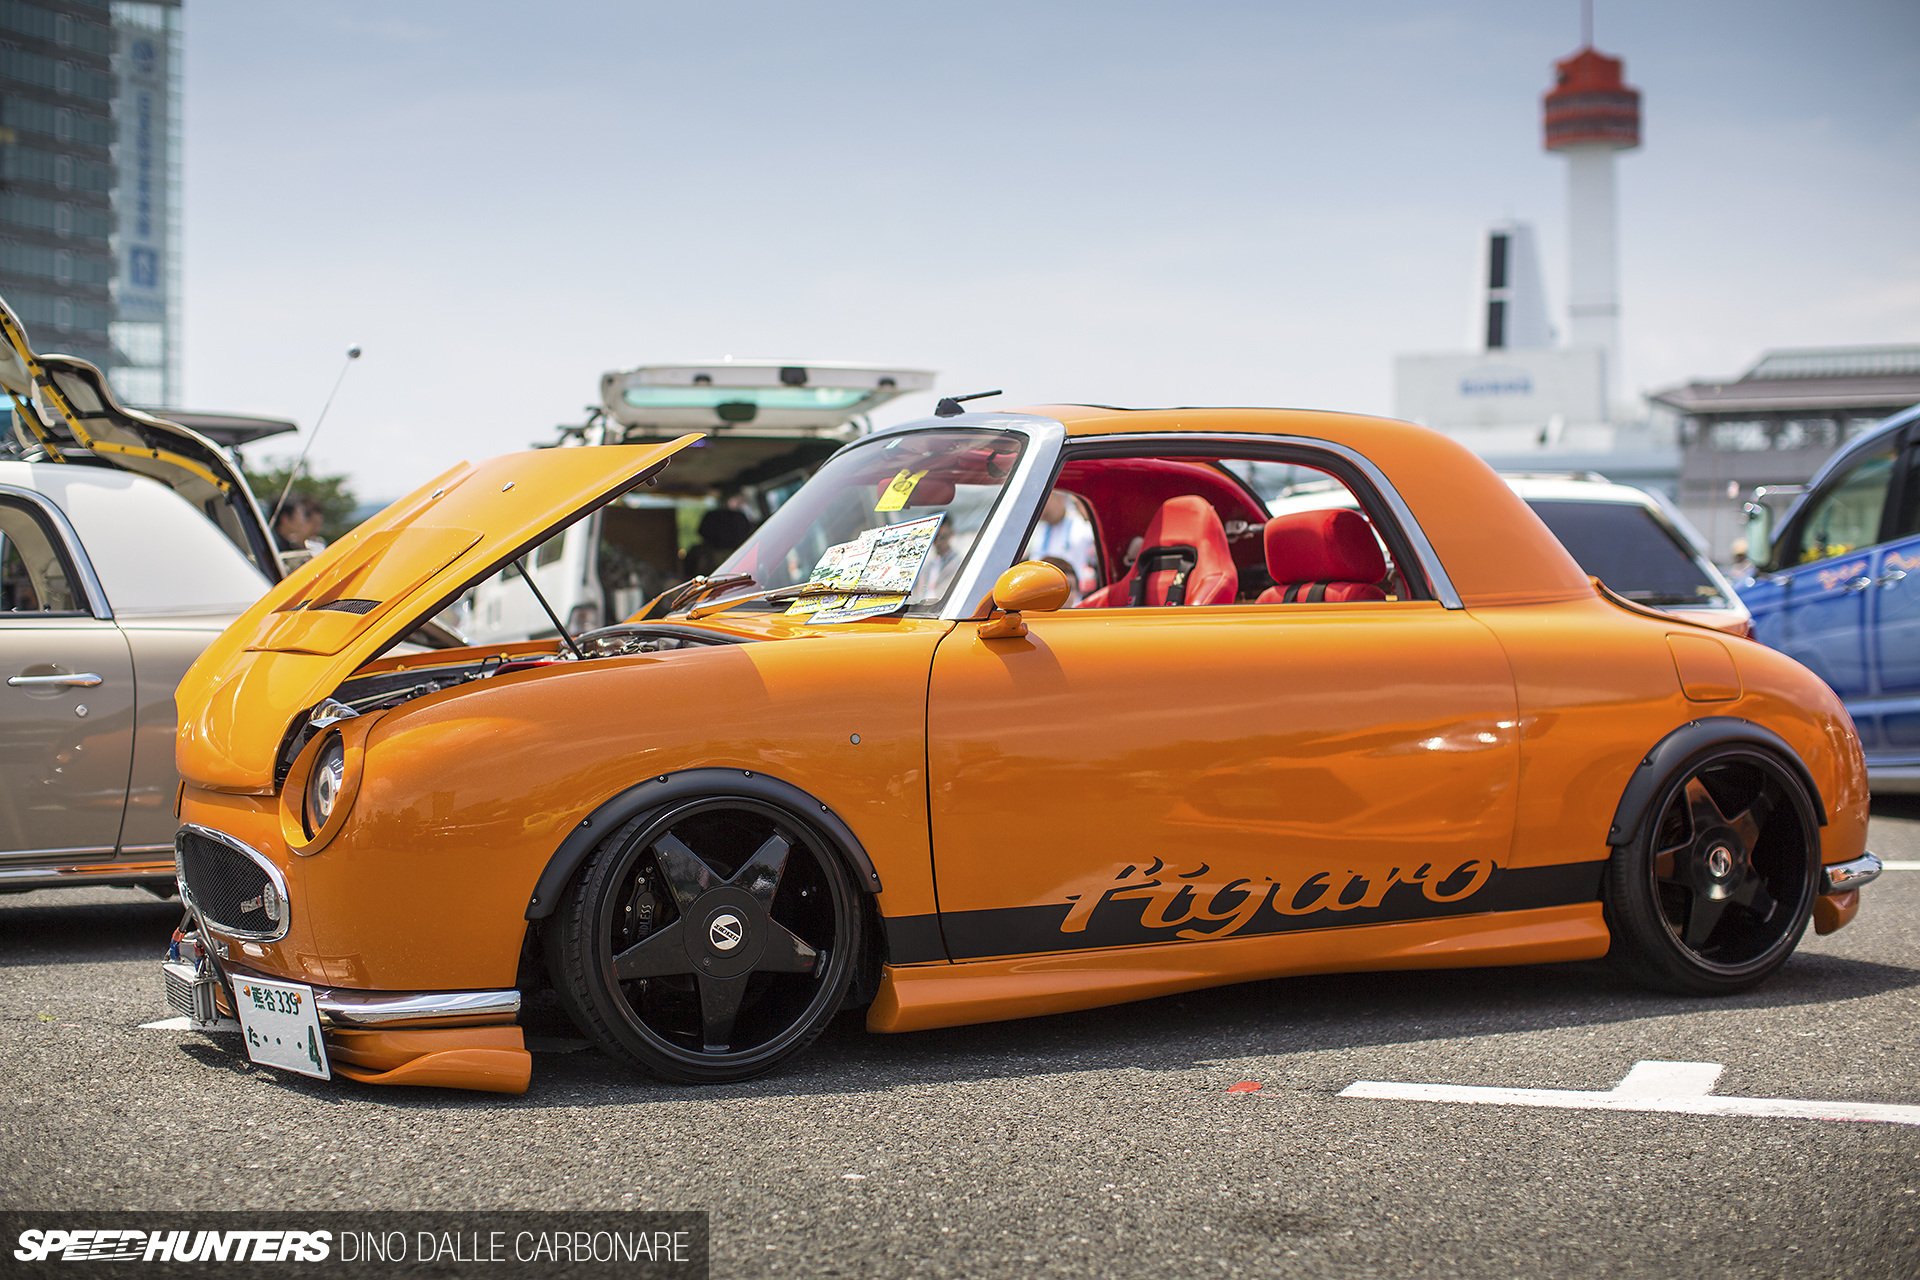 A Nissan Figaro That Wants To Be Different - Speedhunters